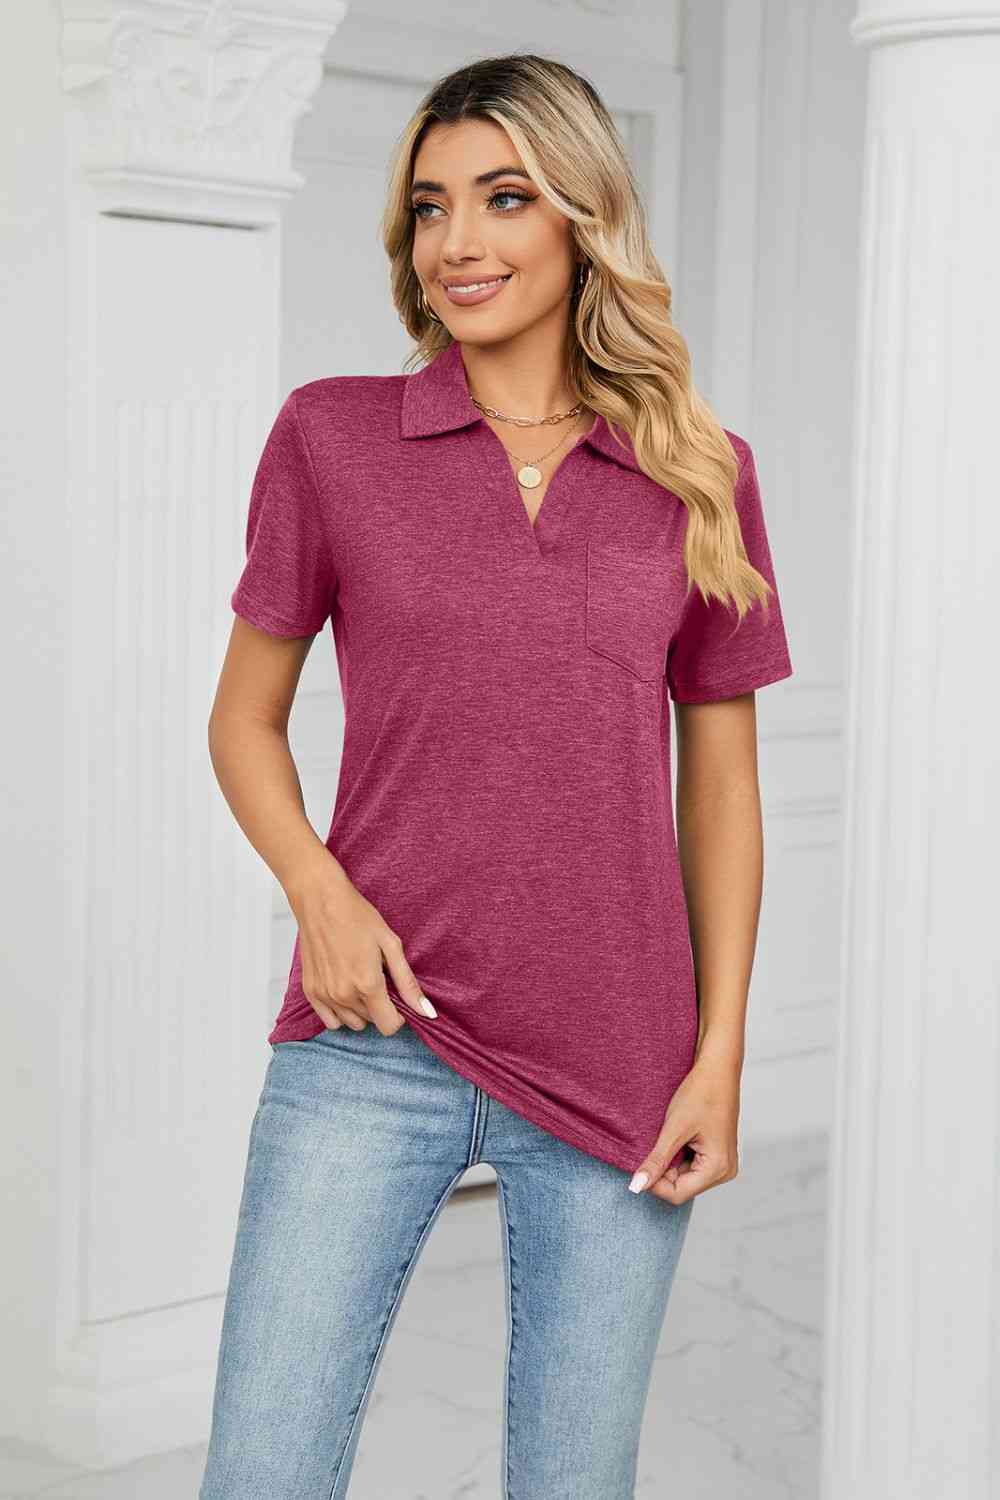 Curved Hem Johnny Collar Polo Shirt in 7 Color Choices in Size S, M, L, XL, or 2XL